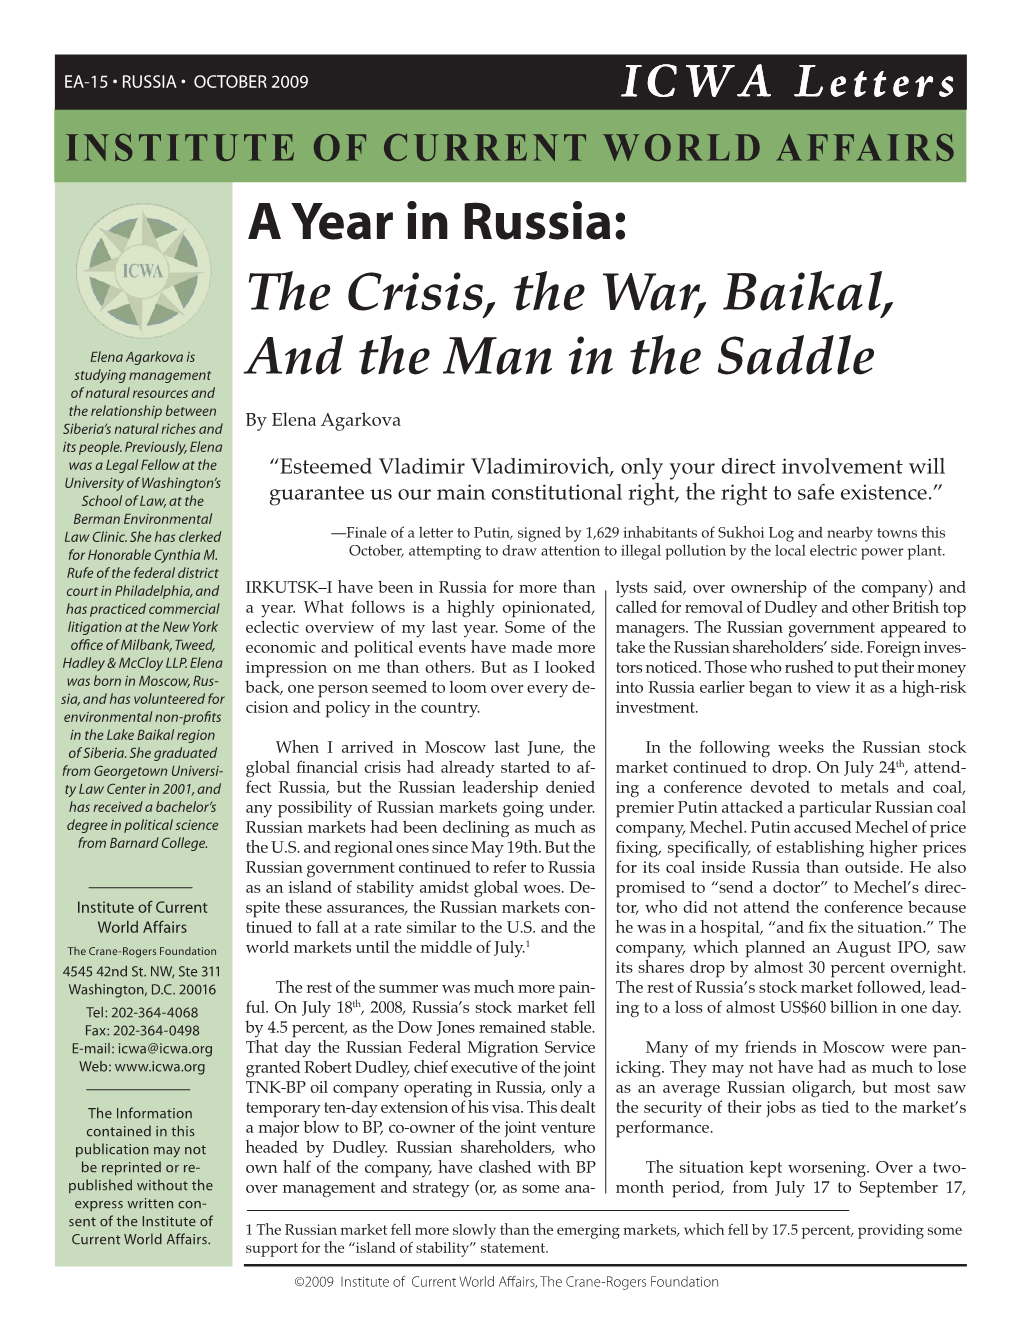 A Year in Russia: the Crisis, the War, Baikal, and the Man in the Saddle